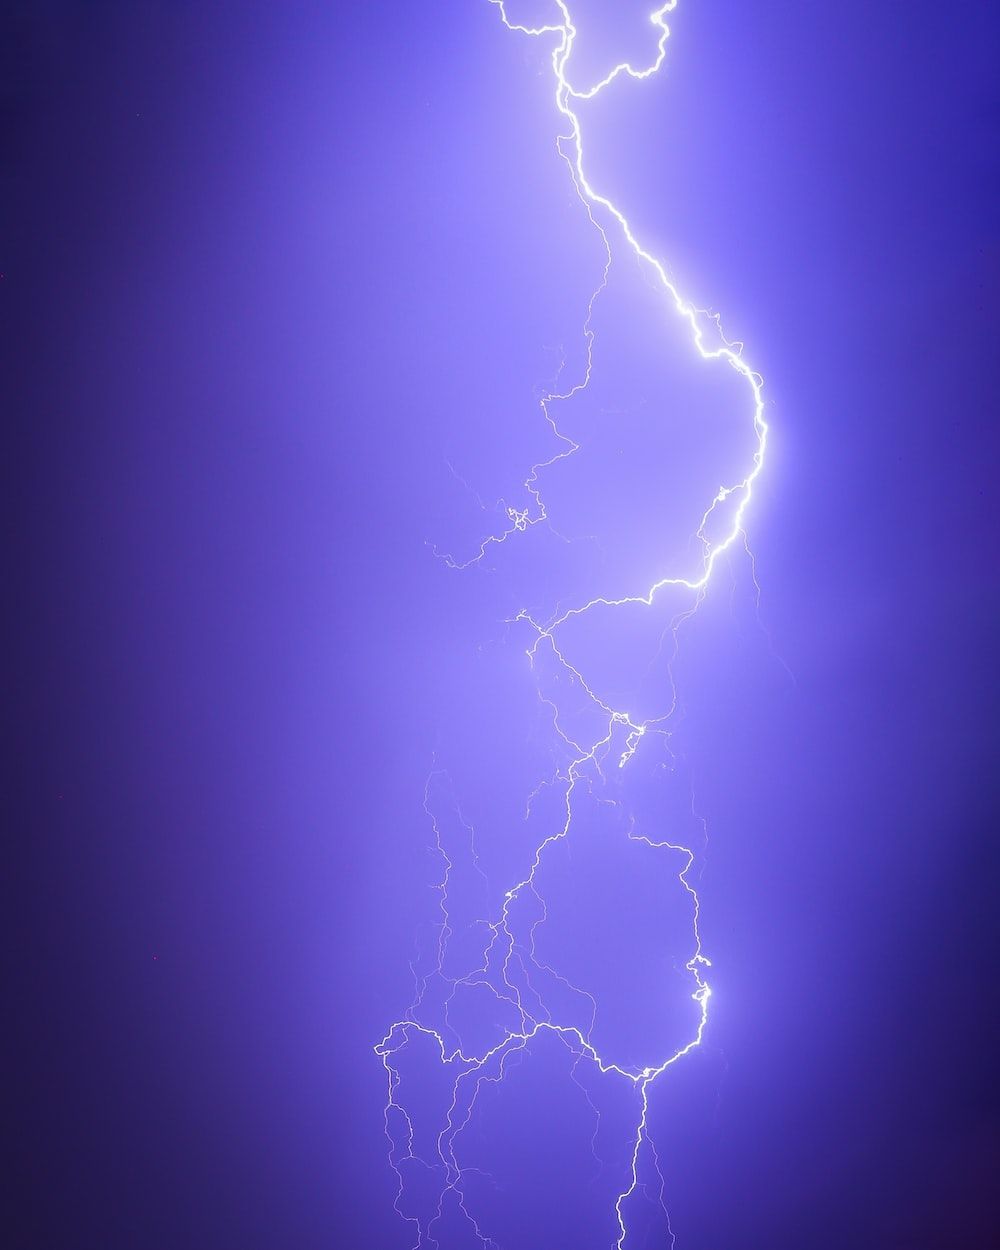 Purple Lightning Picture. Download Free Image